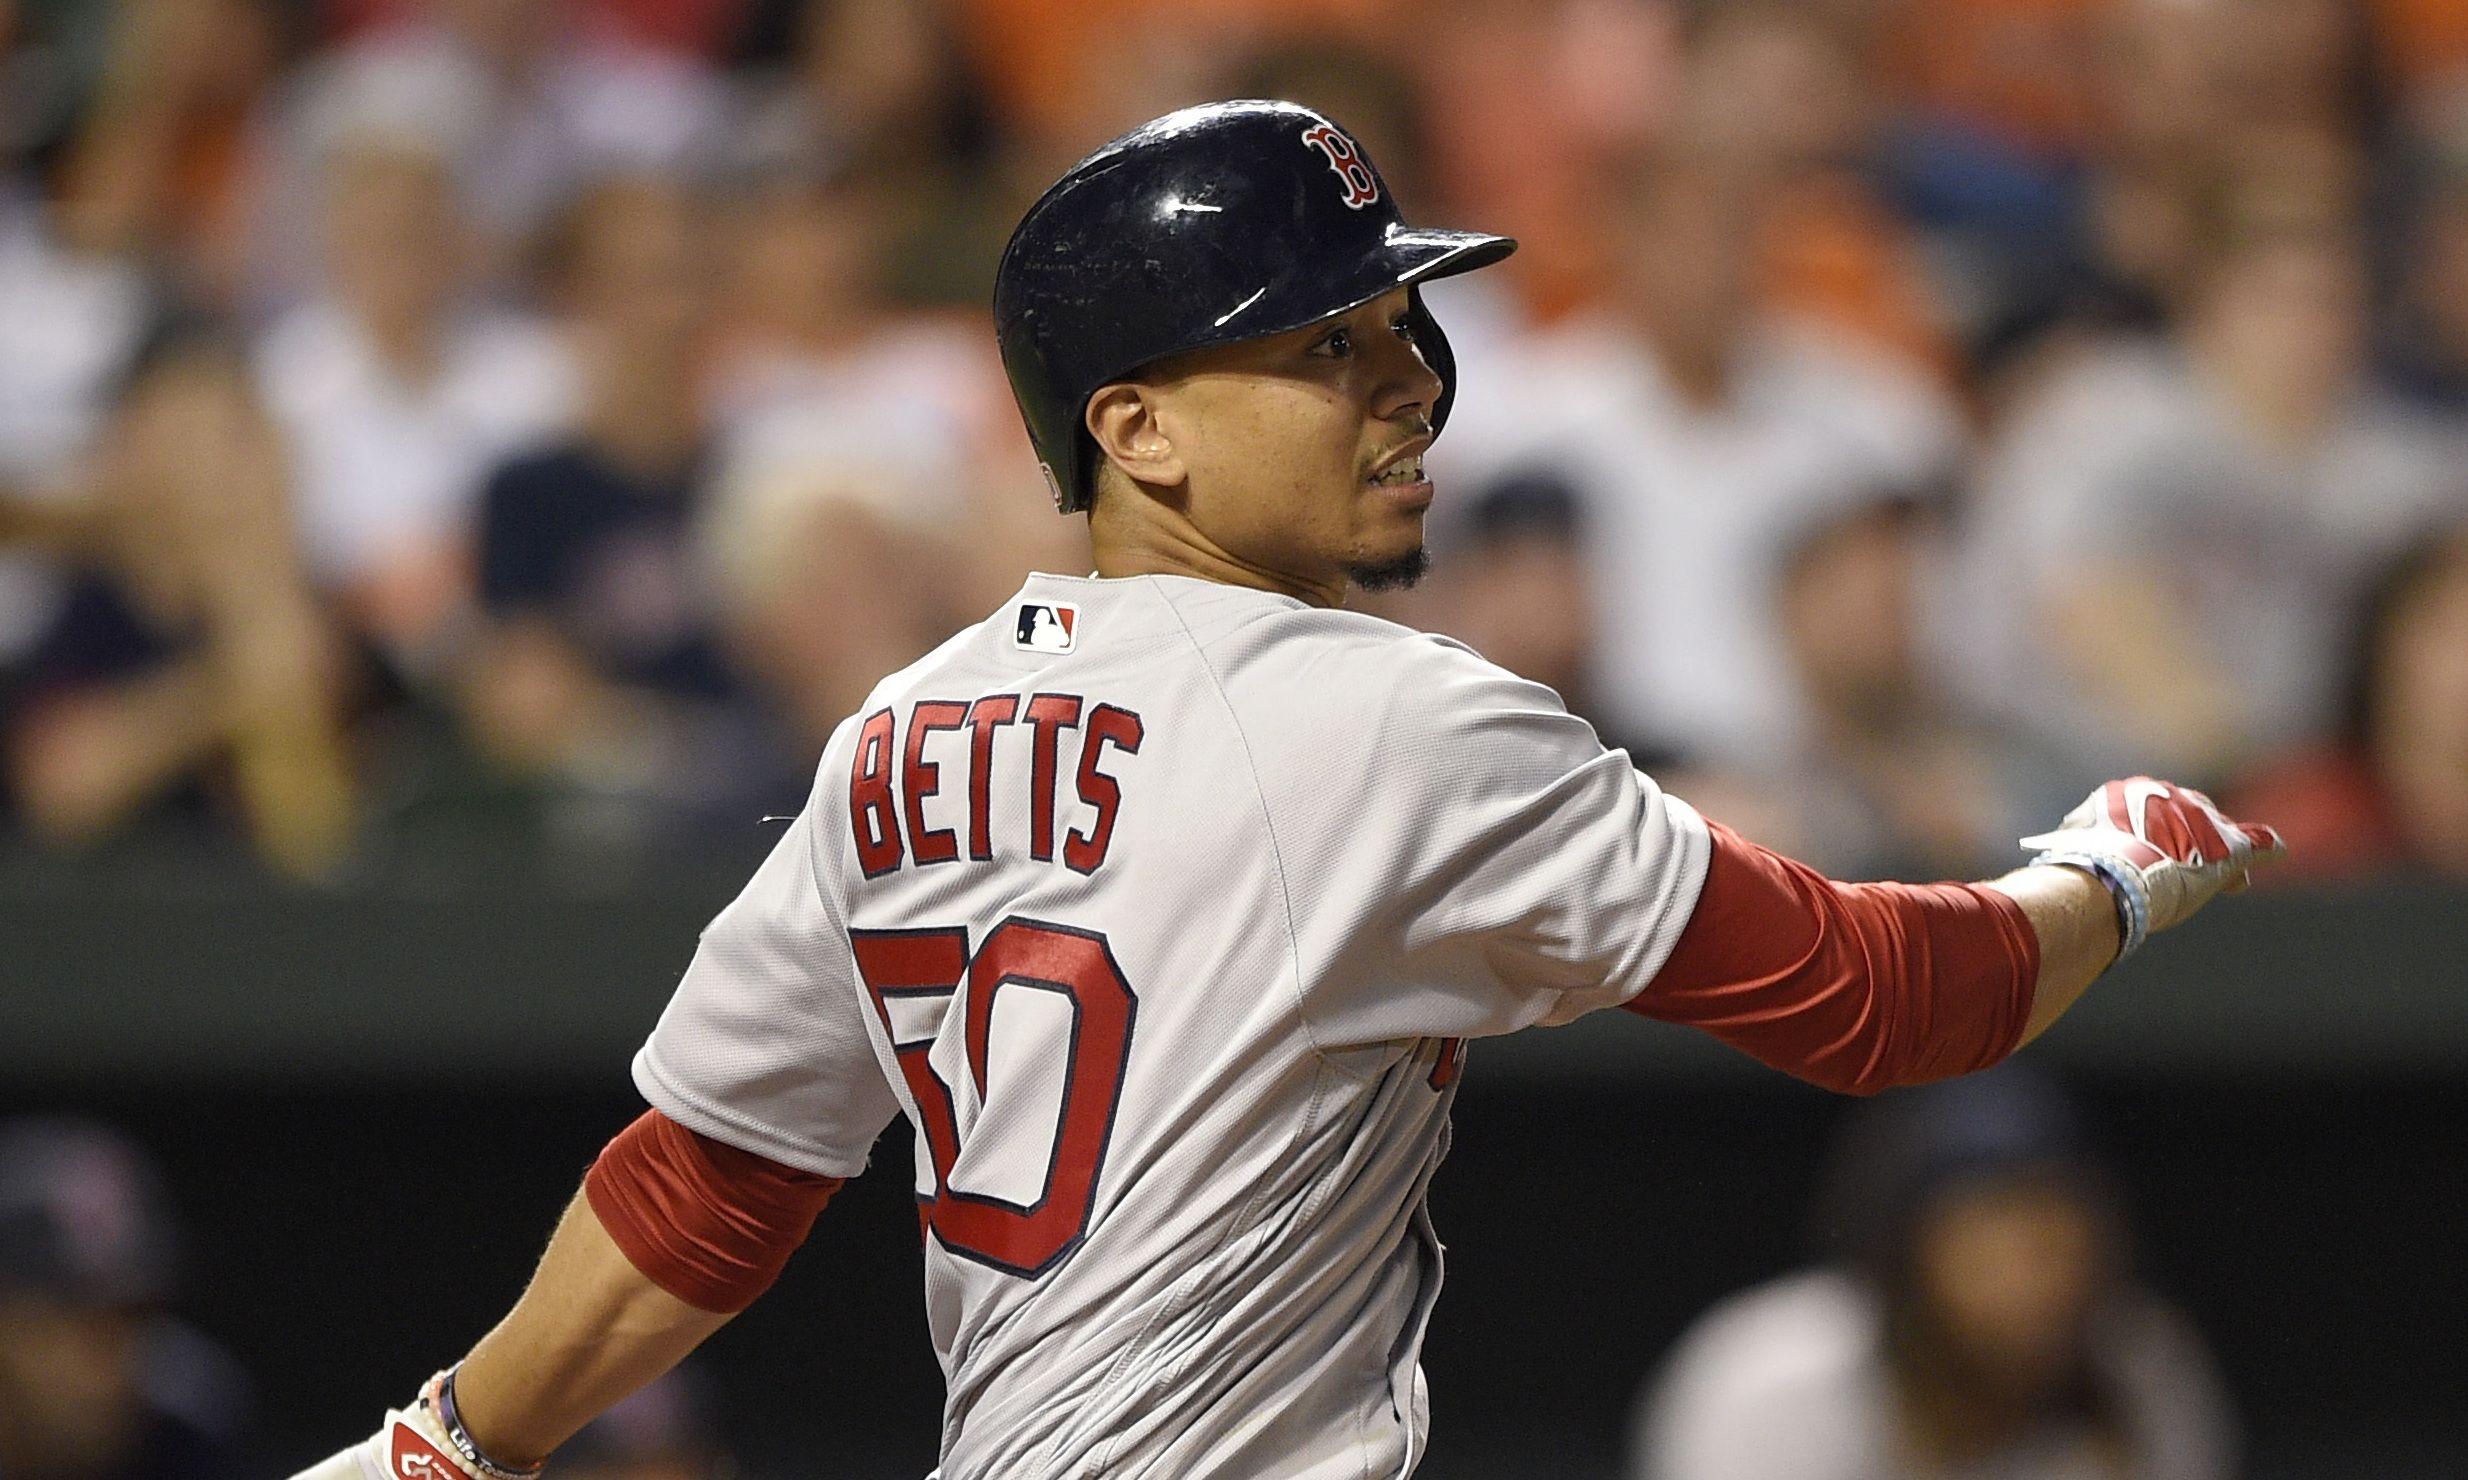 Quotes, notes and stars: Mookie Betts belts three homers